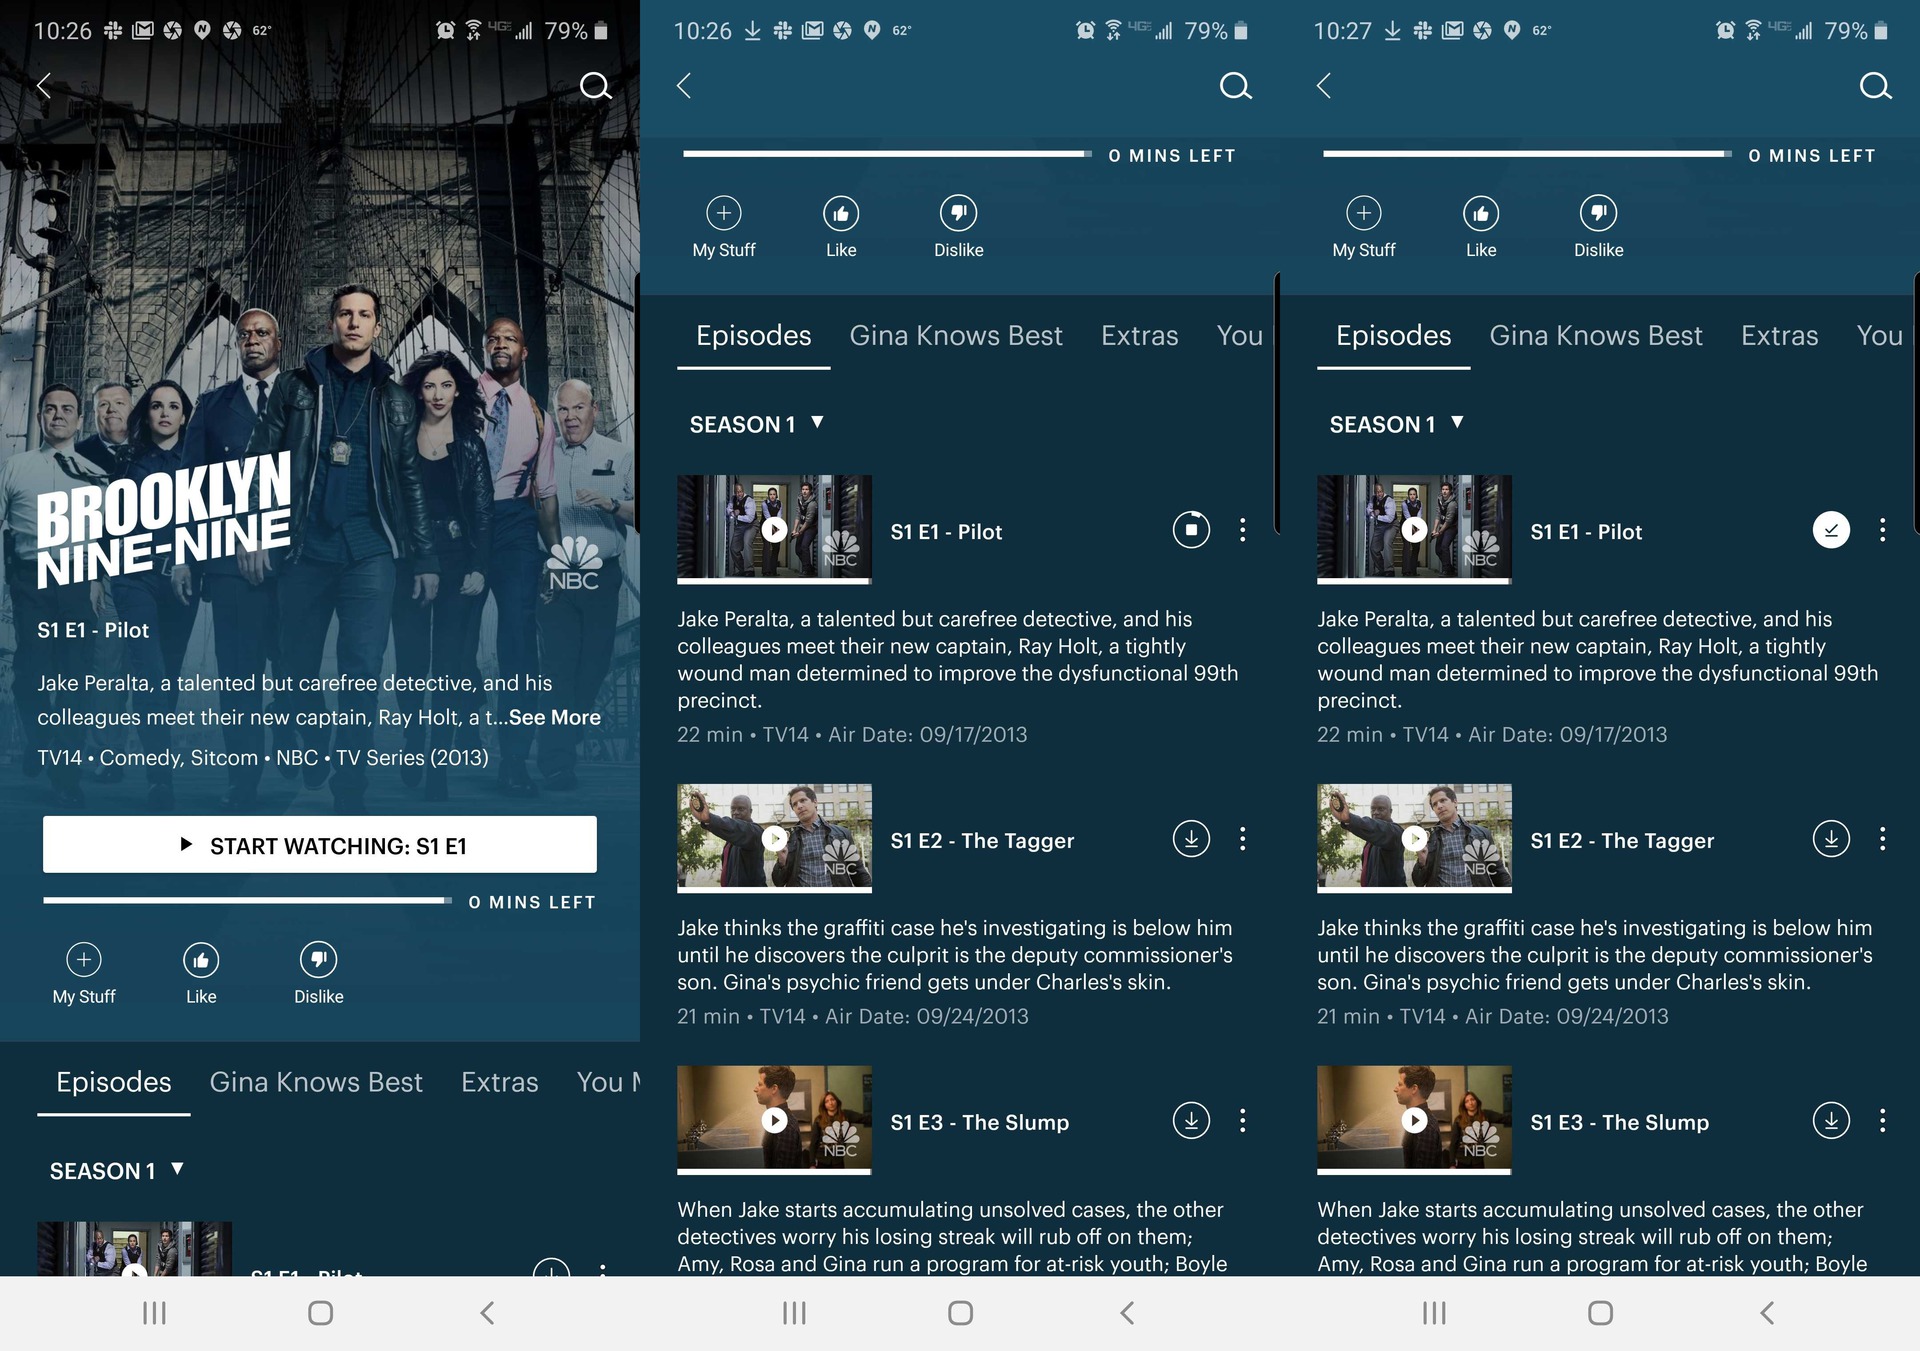 How To Download Movies And Shows On Hulu To Watch Offline